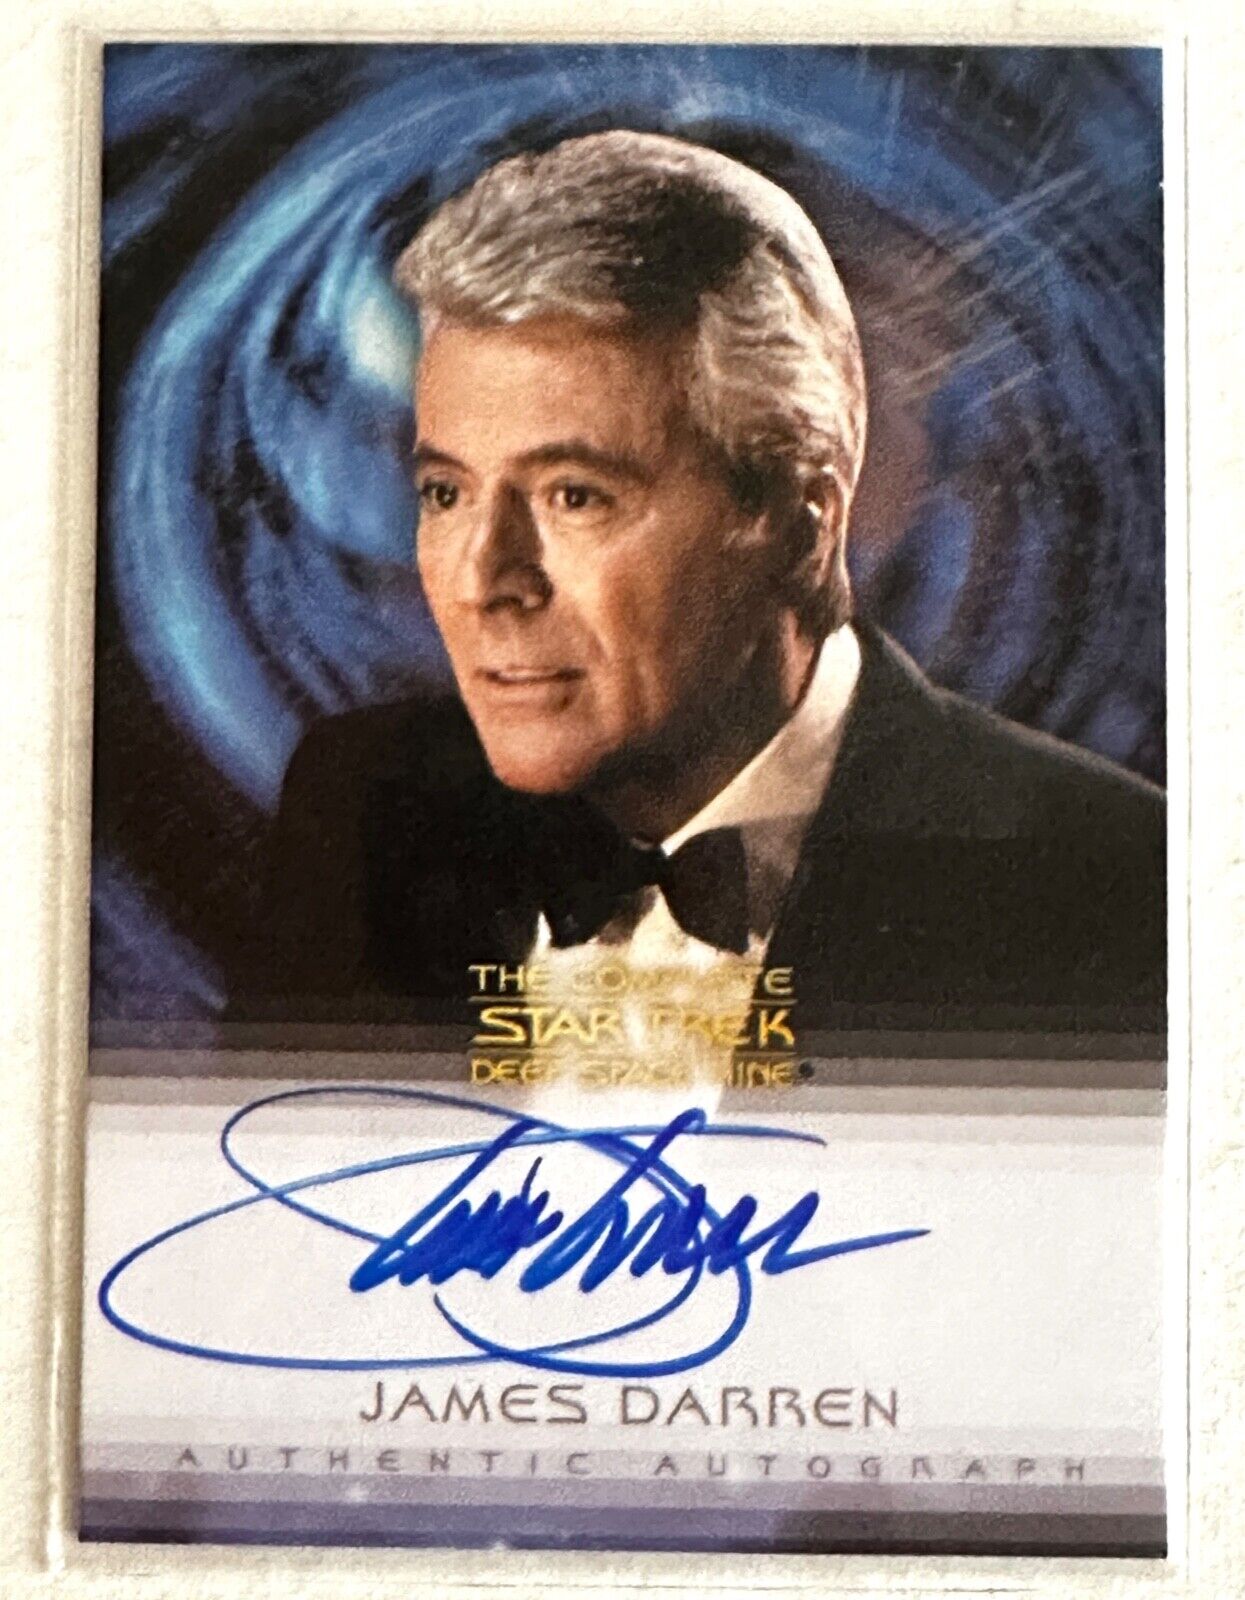 2007 The Complete Star Trek: Deep Space 9 Autograph Card Signed by James Darren